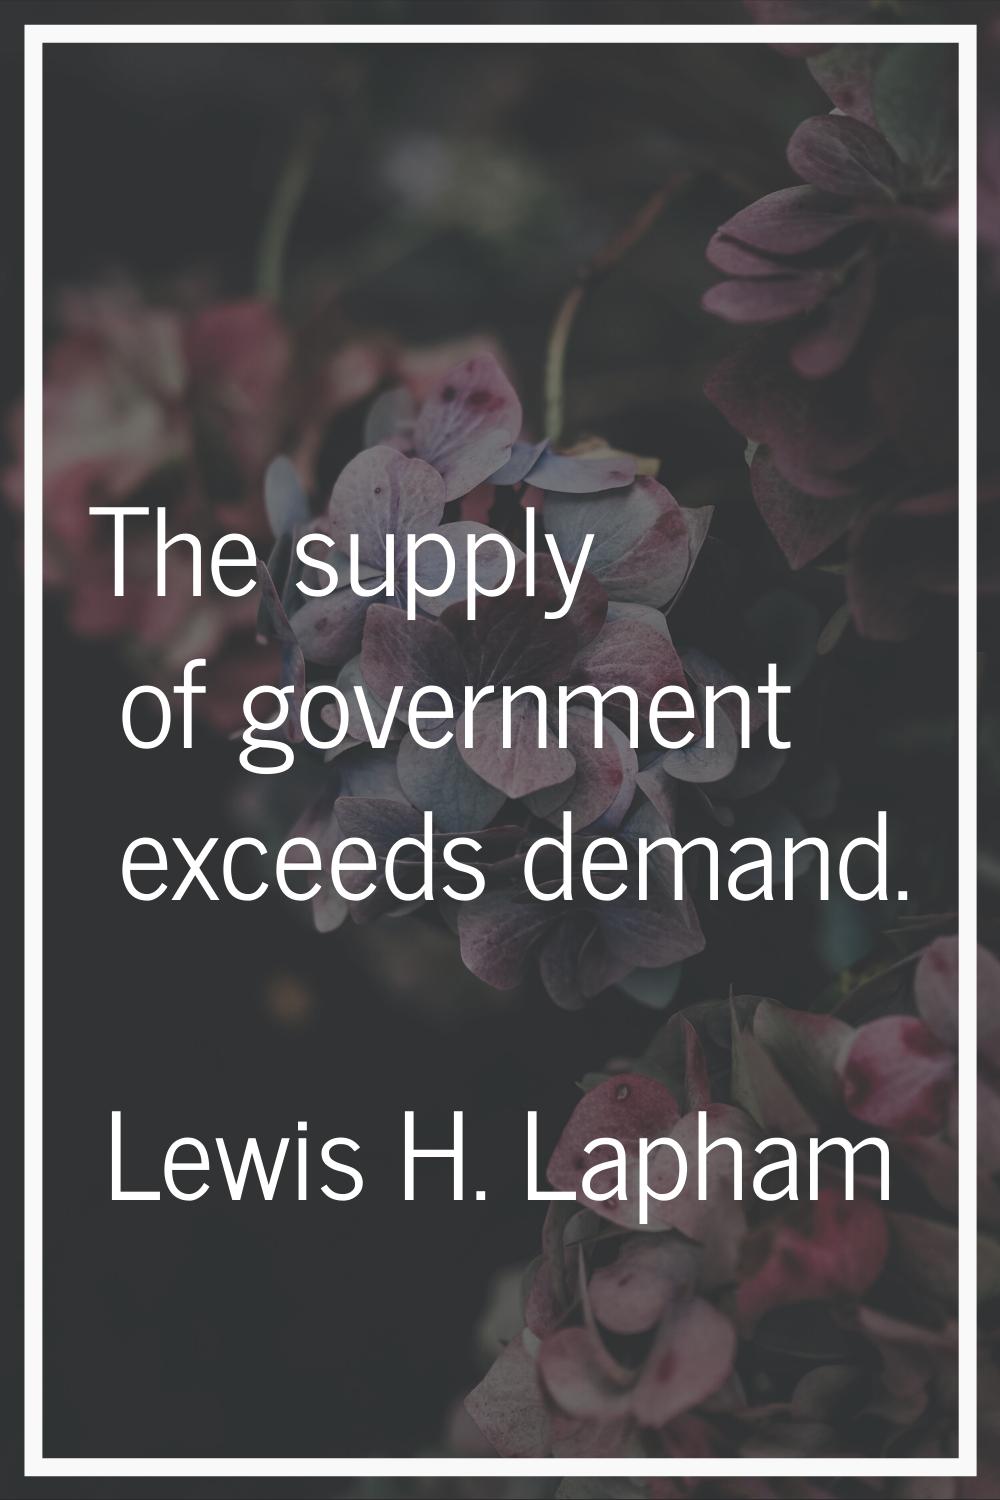 The supply of government exceeds demand.